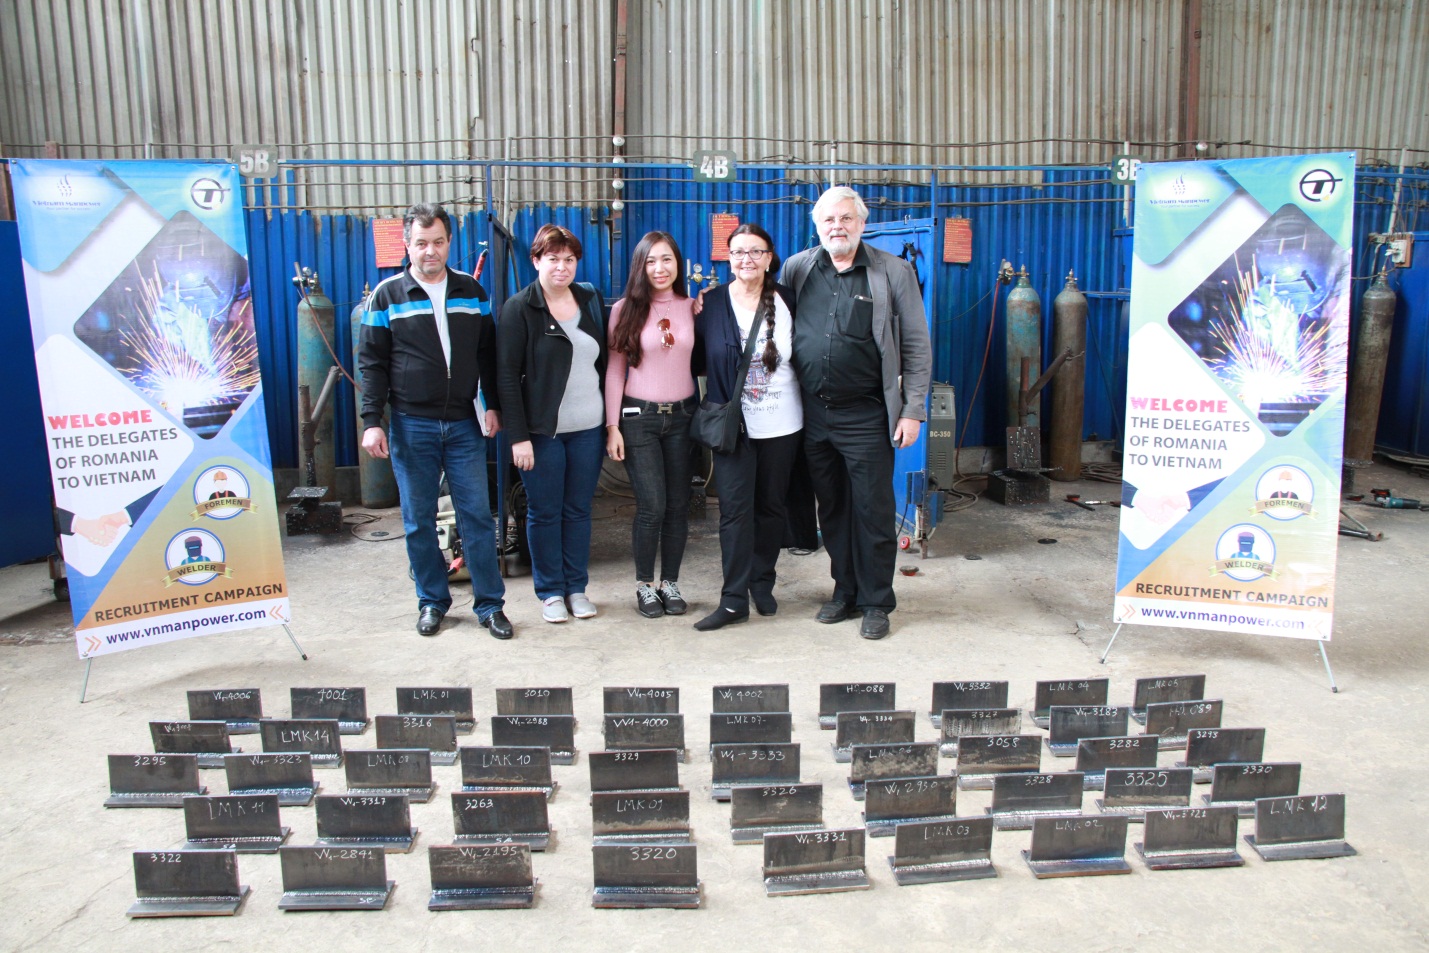 95% of Vietnam welders passed the trade test with German company T.Q to work in Romania